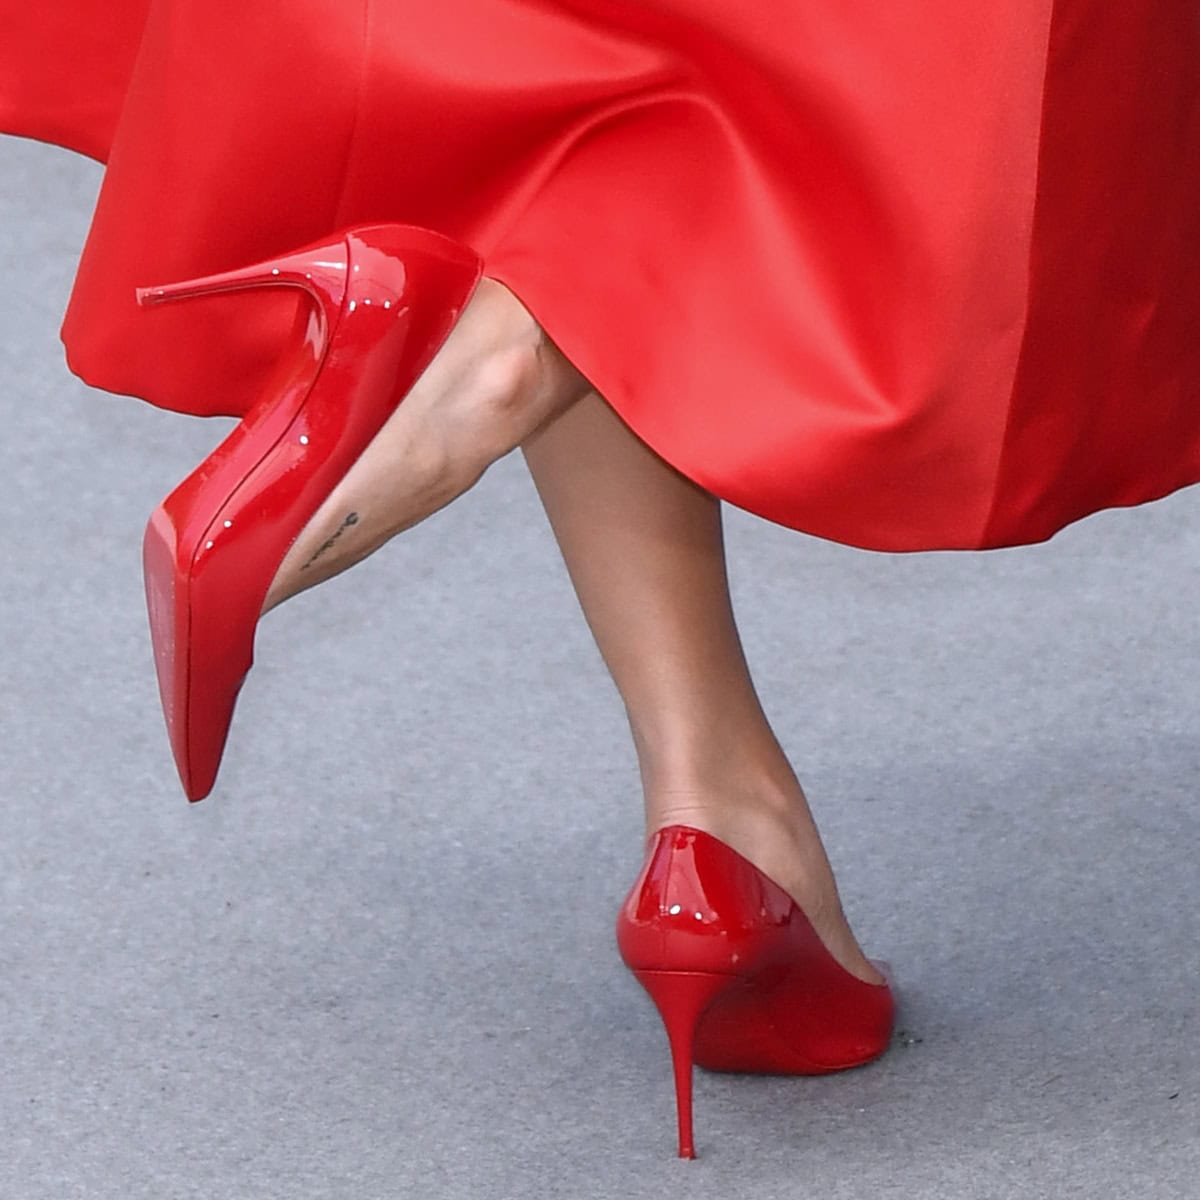 Selena Gomez flaunts the iconic red soles of her Christian Louboutin Kate pumps, perfectly complementing her scarlet Giambattista Valli dress at the Cannes Film Festival